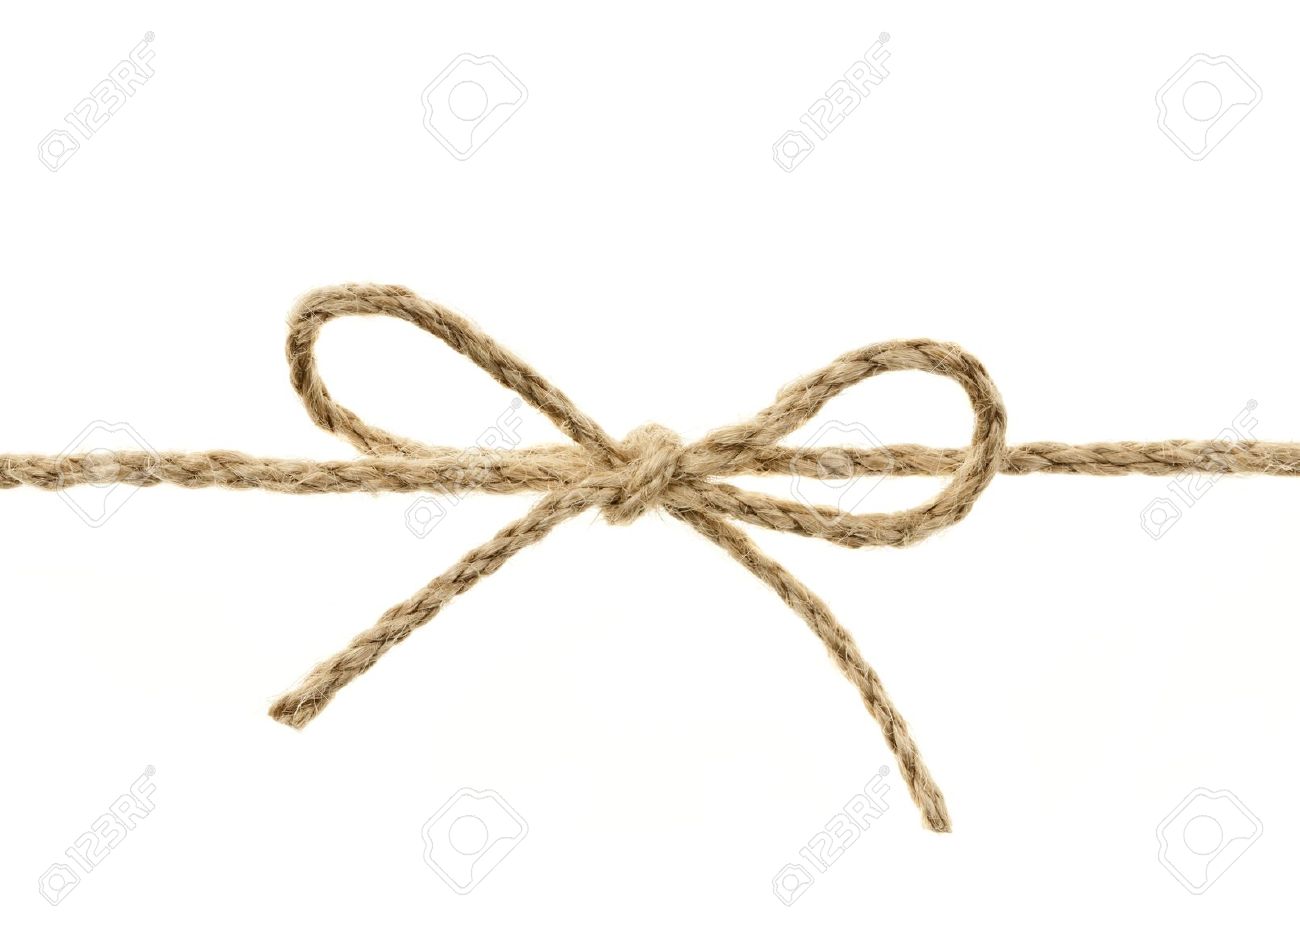 Closeup Of Braided Twine Tied In A Bow Knot Isolated On White Background Stock Photo   - Twine, Transparent background PNG HD thumbnail